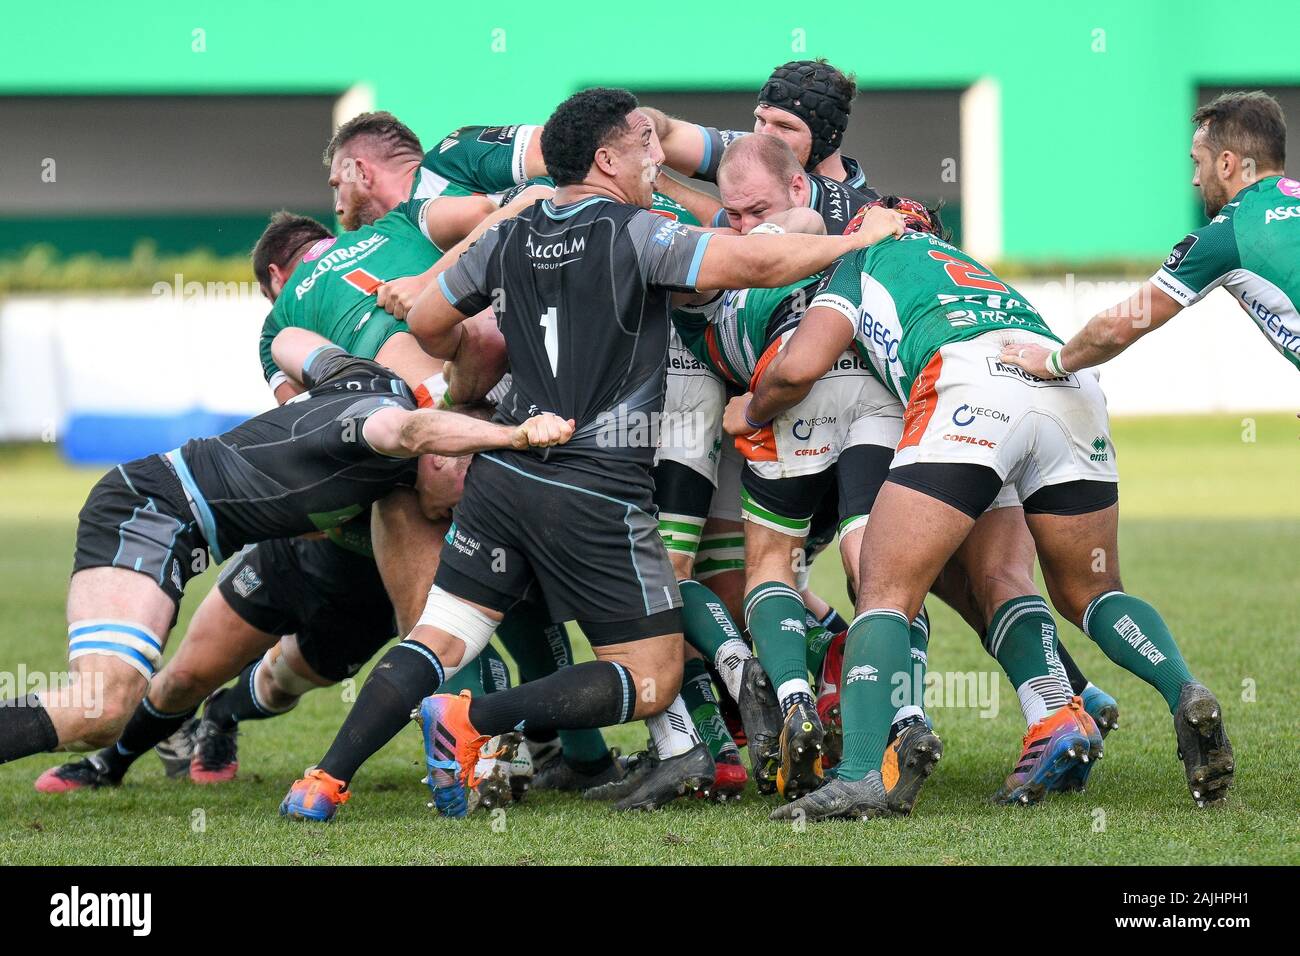 Treviso, Italy.  4th Jan, 2020. maulduring Benetton Treviso vs Glasgow Warriors, Rugby Guinness Pro 14 in Treviso, Italy, January 04 2020 - LPS/Ettore Griffoni Credit: Ettore Griffoni/LPS/ZUMA Wire/Alamy Live News Stock Photo